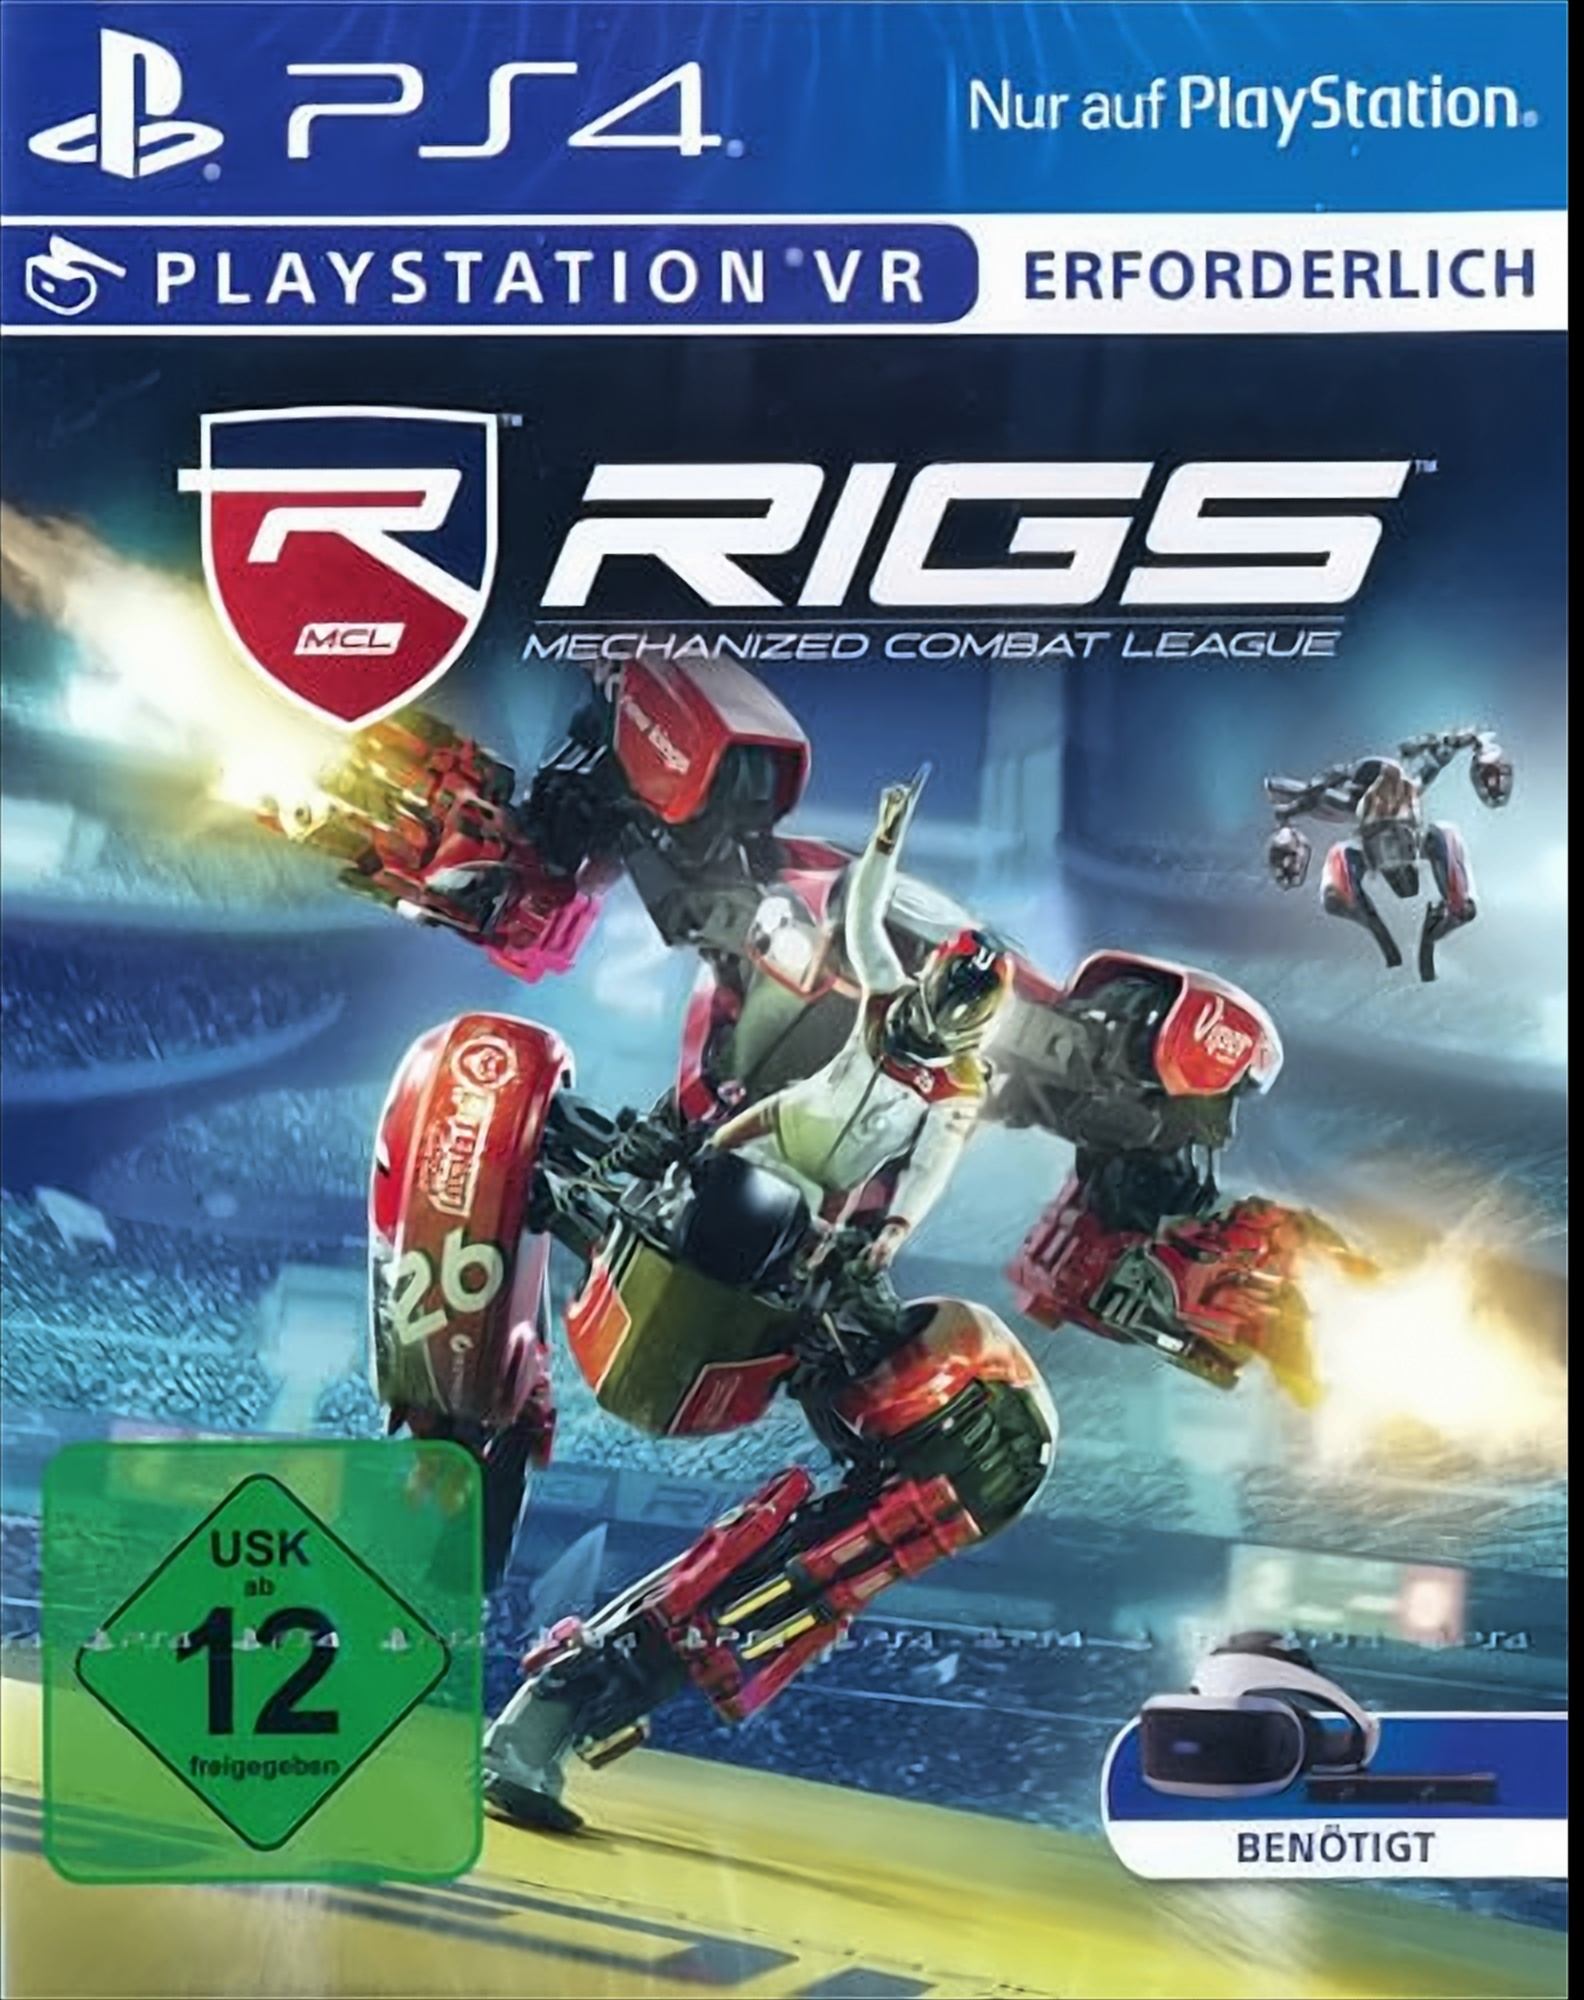 [PlayStation RIGS: League Combat (only 4] - Mechanized VR)